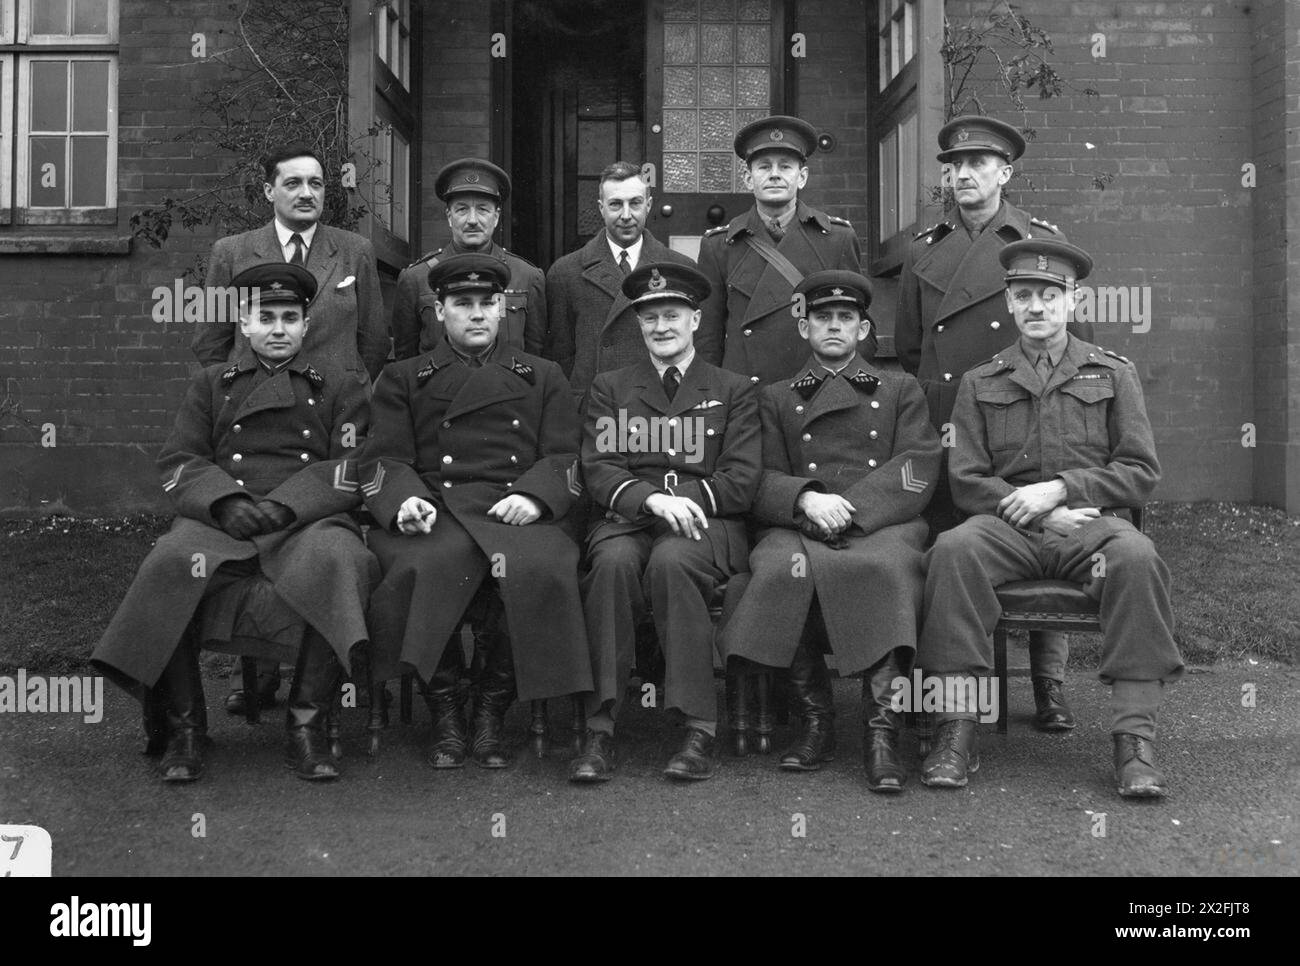 PORTON DOWN CHEMICAL AND BIOLOGICAL DEFENCE ESTABLISHMENT 1917 - 2000 - Officers of the Soviet Union visit Porton Down for the first and only time during the Second World War. Another visit would not take place until 1988. Seated with the visitors are: (front row) the Chief Superintendant, Air Commodore Combe, the Chief Superintendant and Brigadier R M A Welchman. In the back row (left to right) are: O G Sutton, Lt Col A E Kent, Edgar Bateman, Captain D C Evans and an unidentified officer Stock Photo